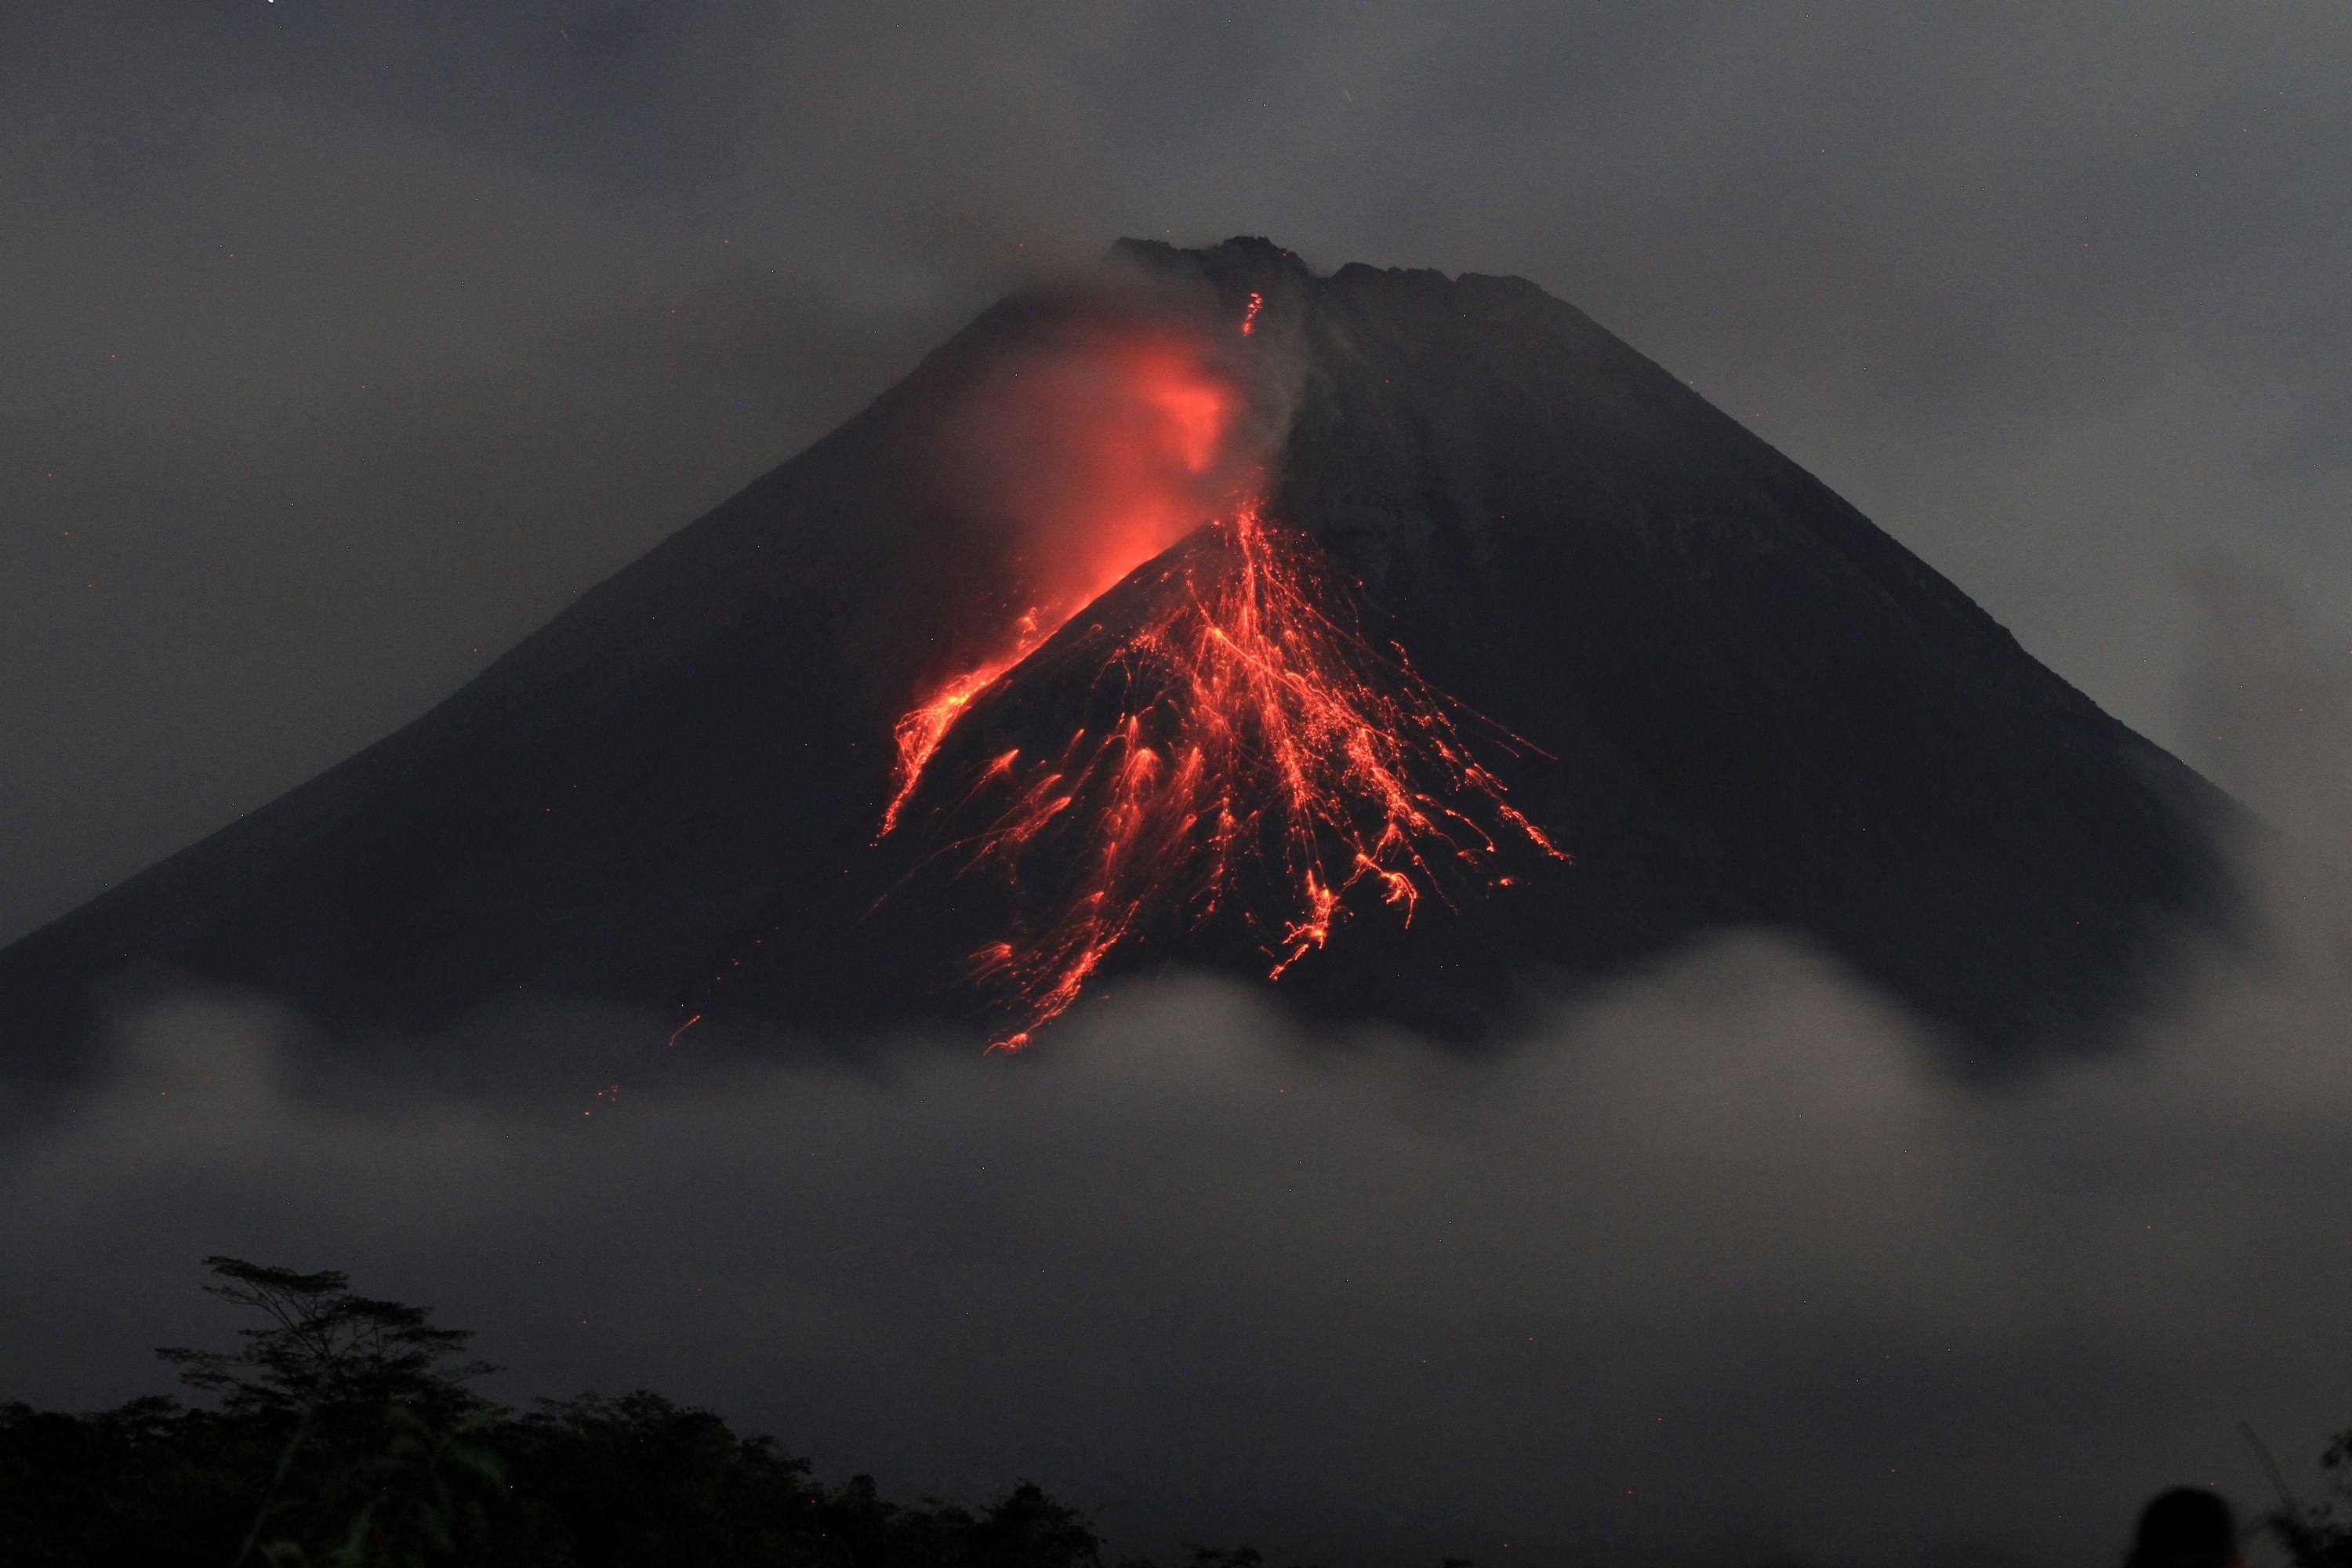 Lava erupts from Mount Merapi, sliding down the side in a red blaze of sparks and smoke